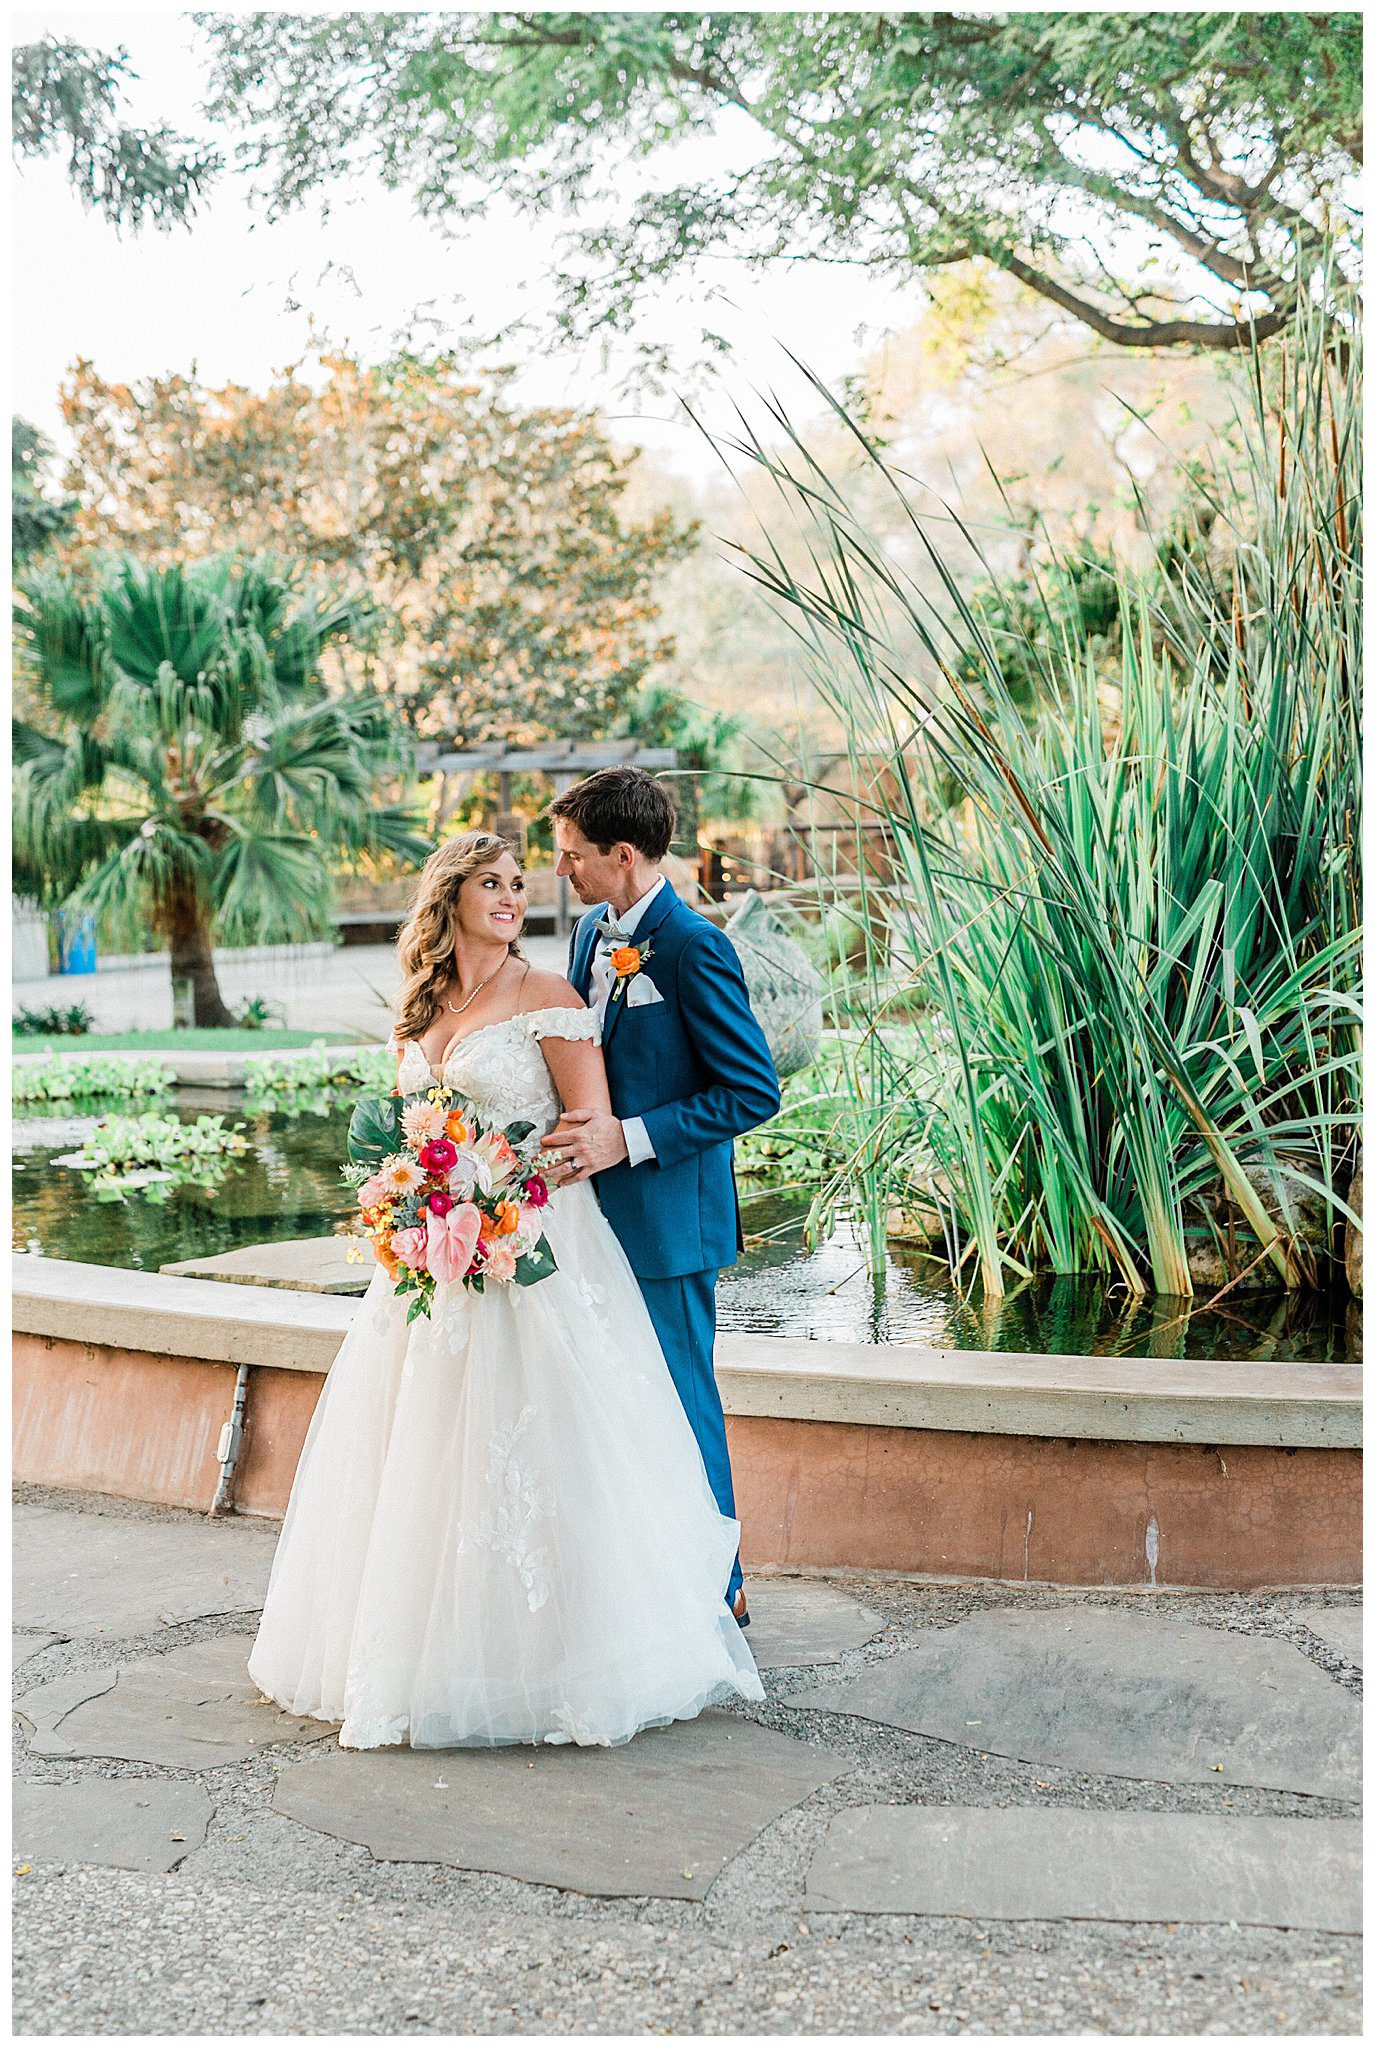 A bride and groom in front of the pond at the Santa Barbara zoo, surrounded by tropical and botanical flowers.